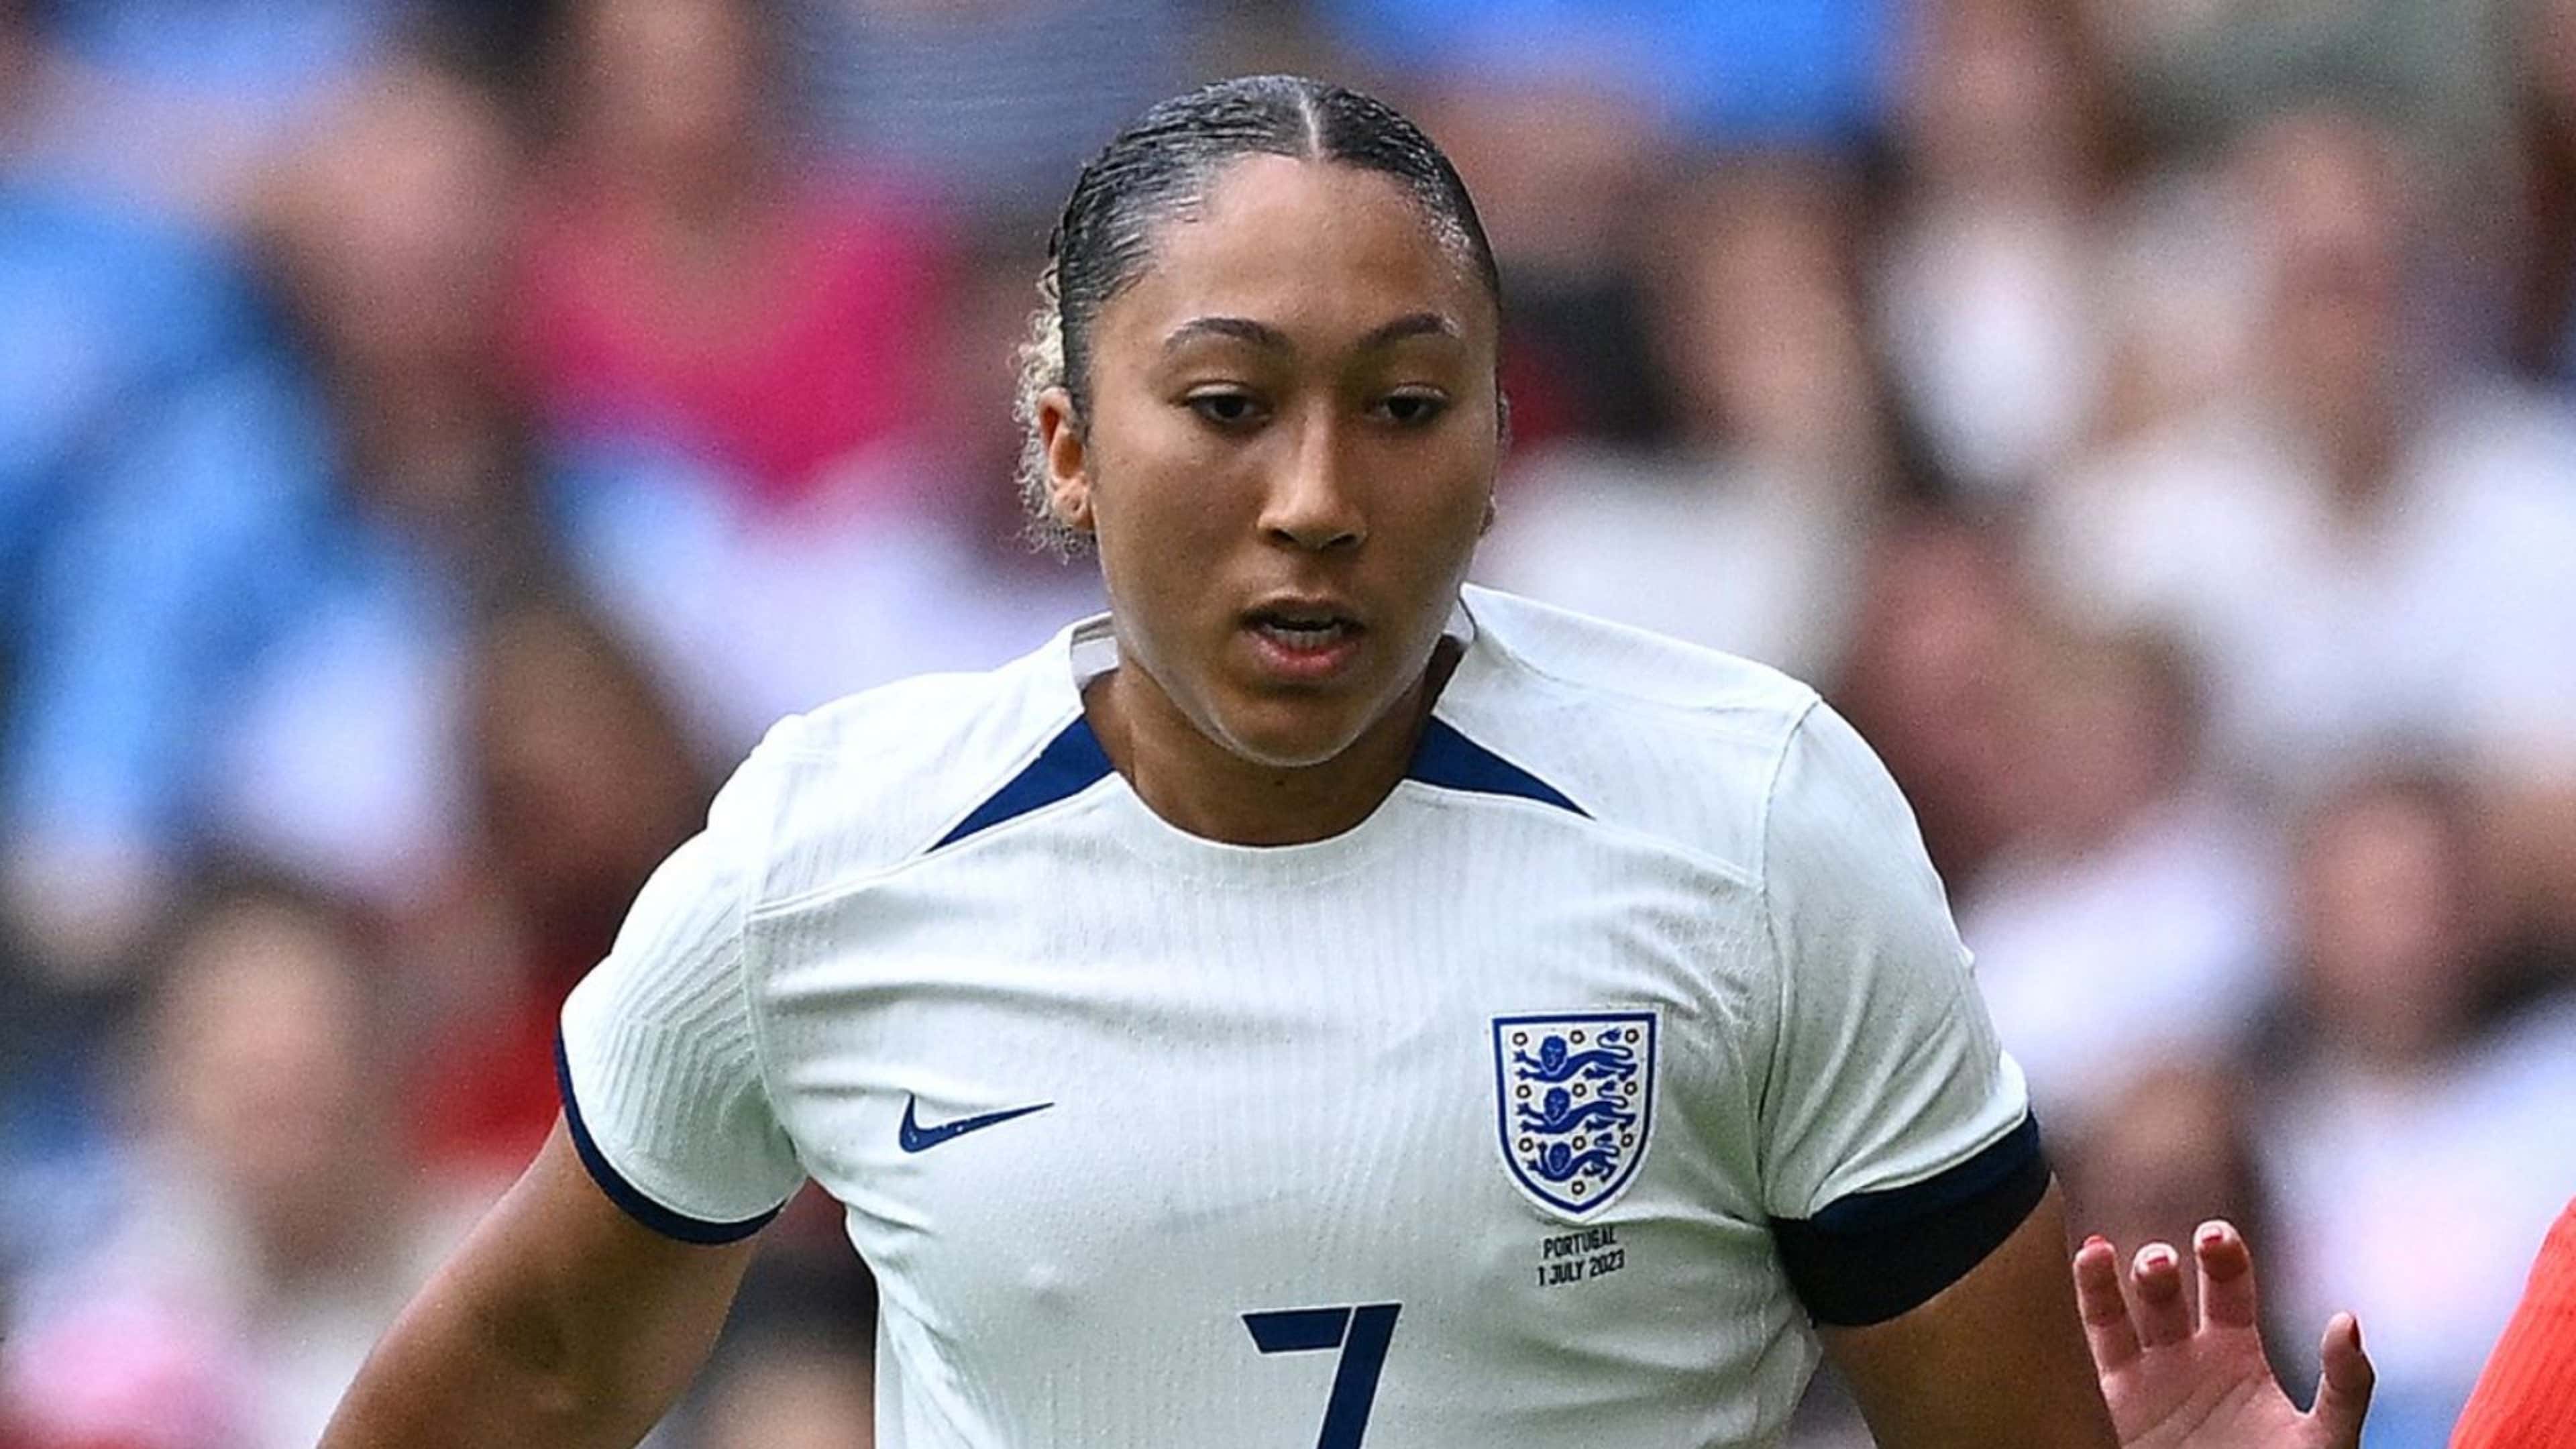 England women's player ratings vs Portugal: Could Lauren James be the  Lionesses' No.10? Chelsea star shines as Women's World Cup send-off  finishes goalless